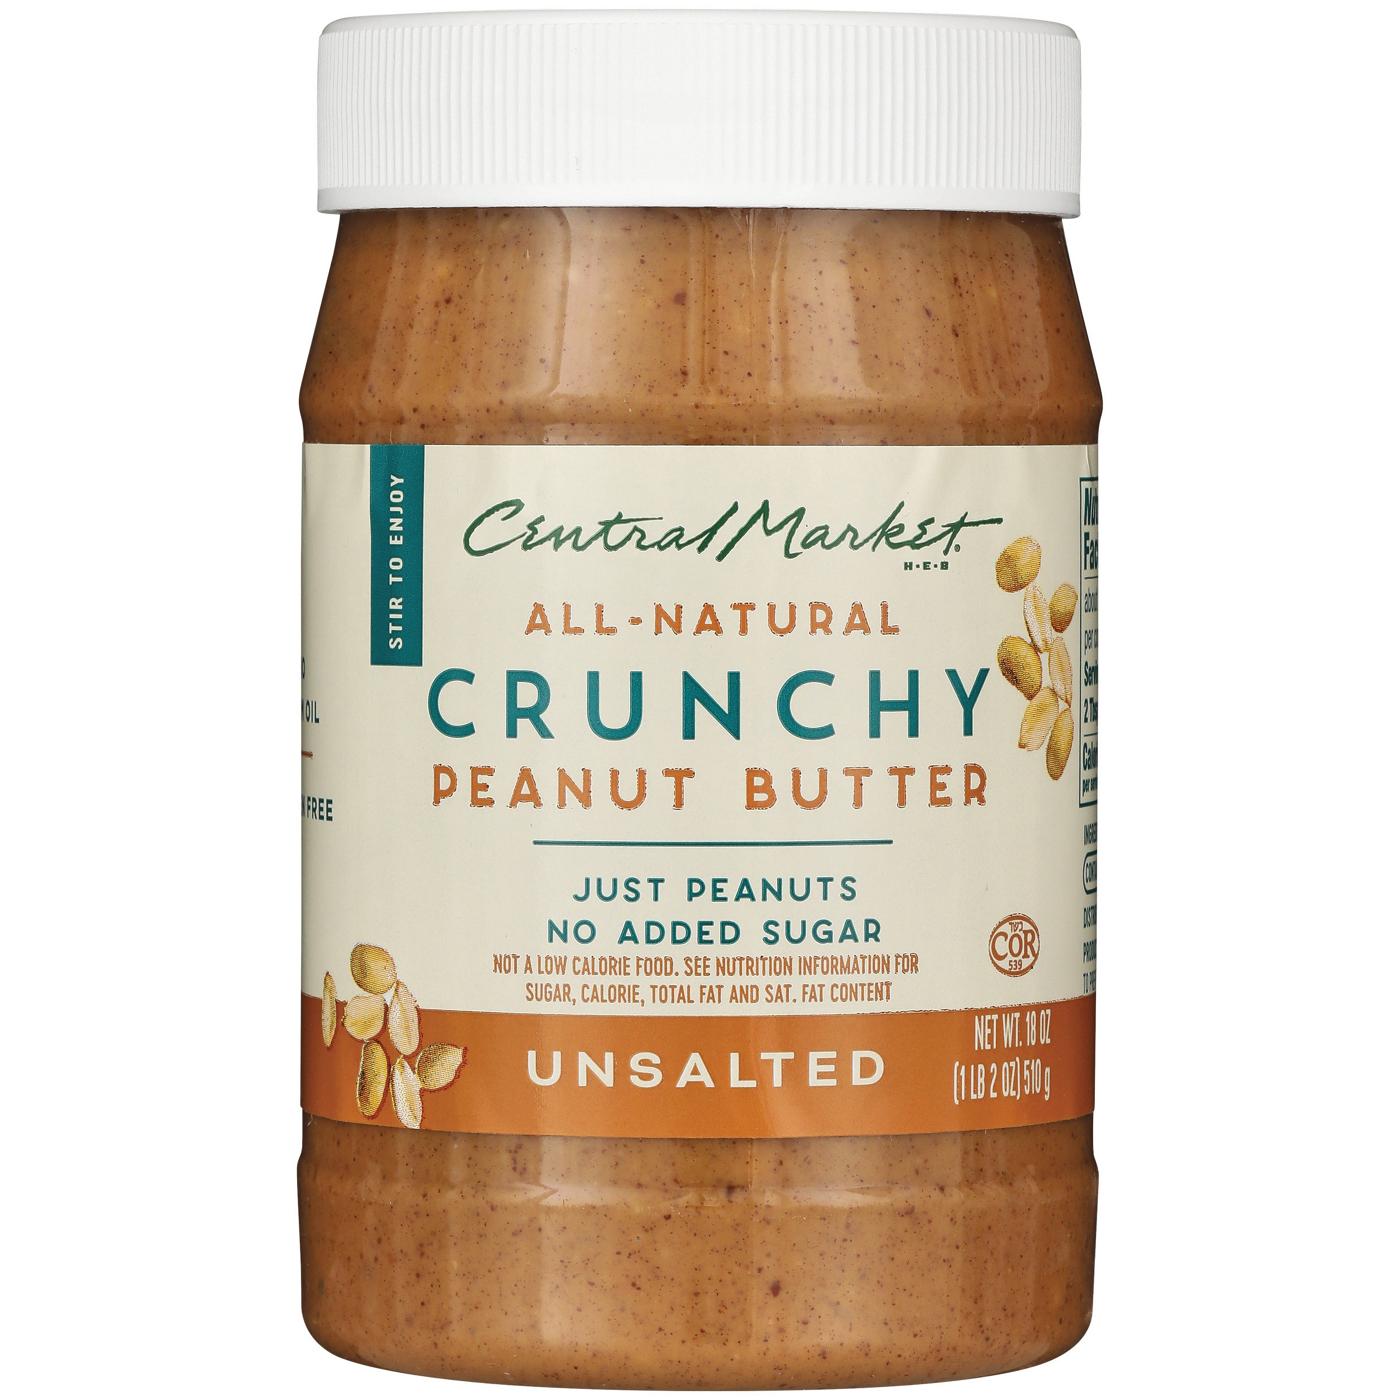 Central Market All-Natural Crunchy Peanut Butter – Unsalted; image 1 of 2